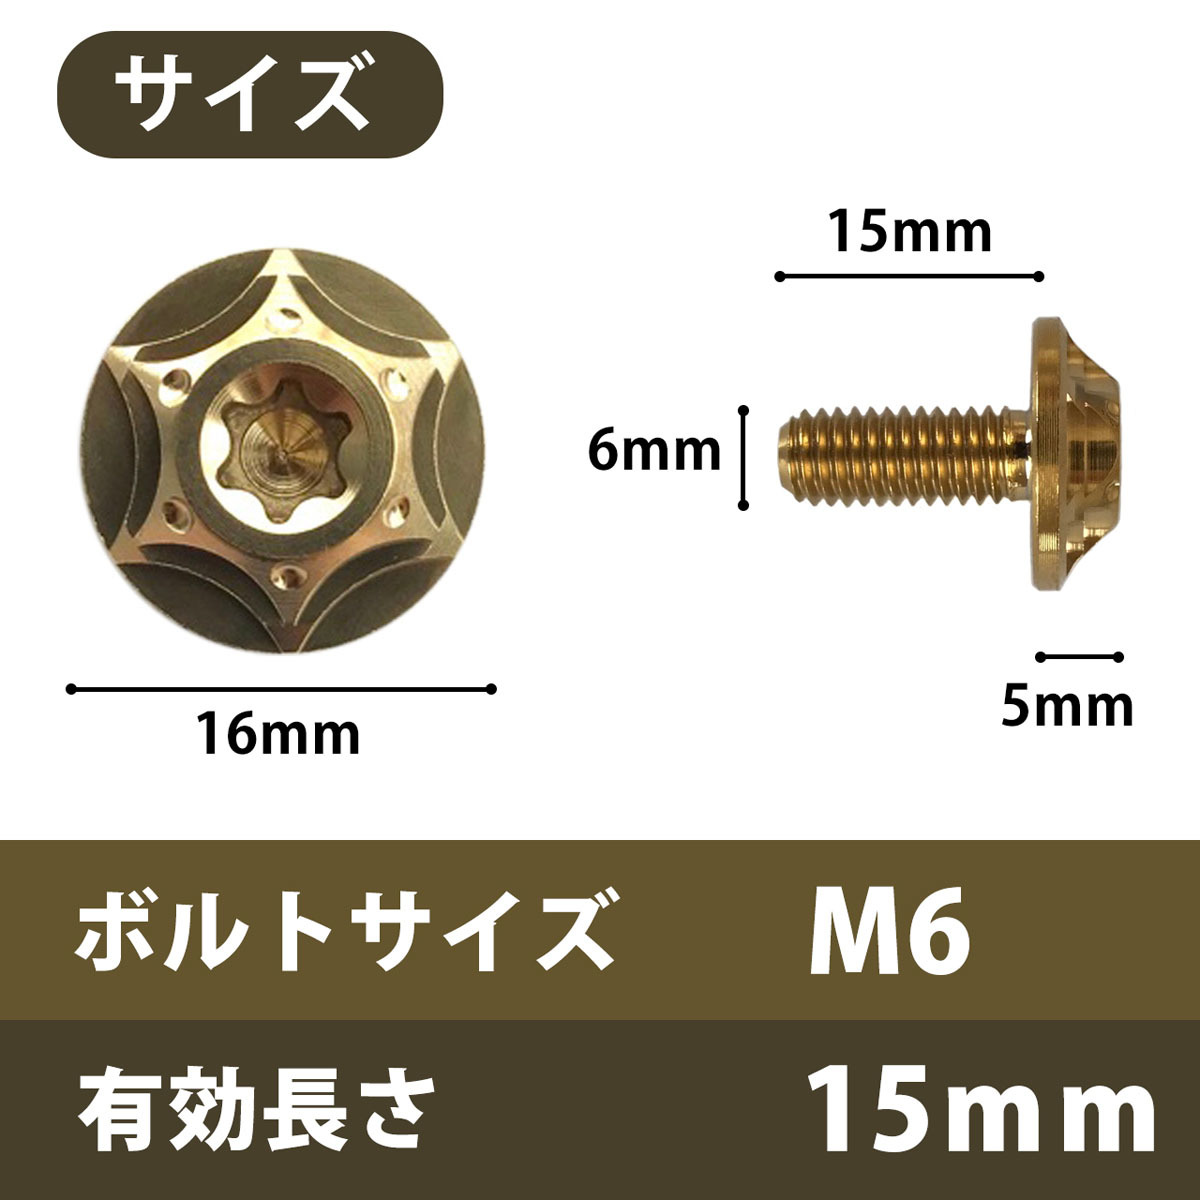  titanium alloy made bolt * Gold color * number plate exclusive use * Esquire Sienta Camry Axio Crown Prius C-HR